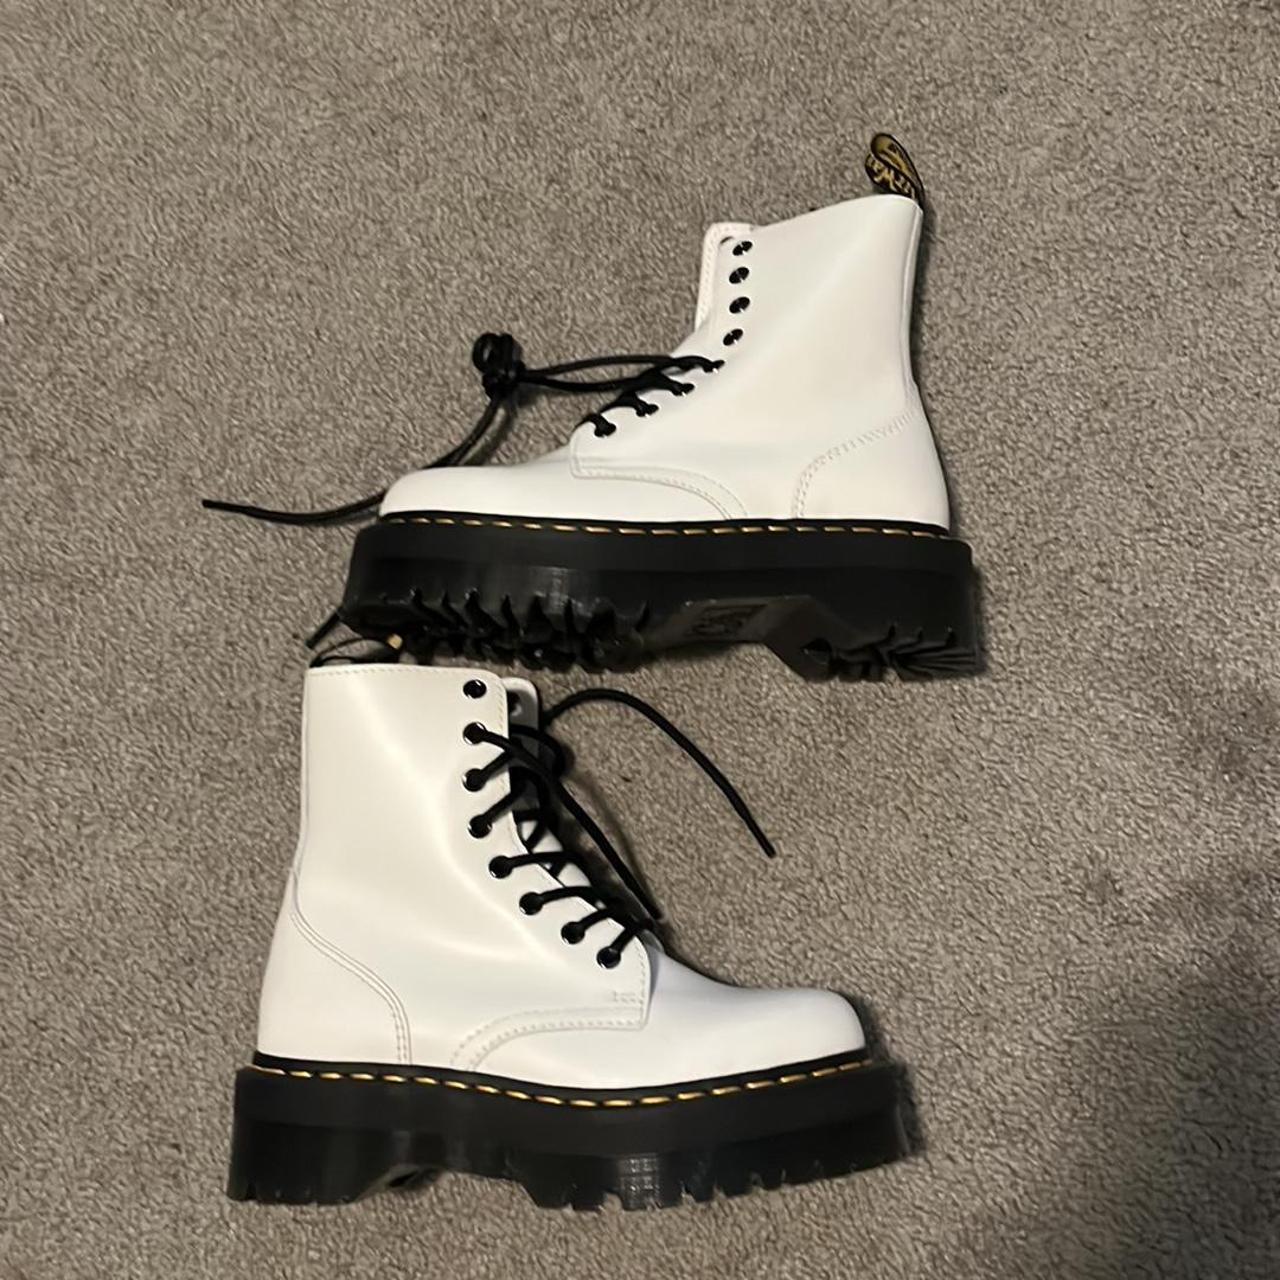 Dr. Martens Women's White and Black Boots